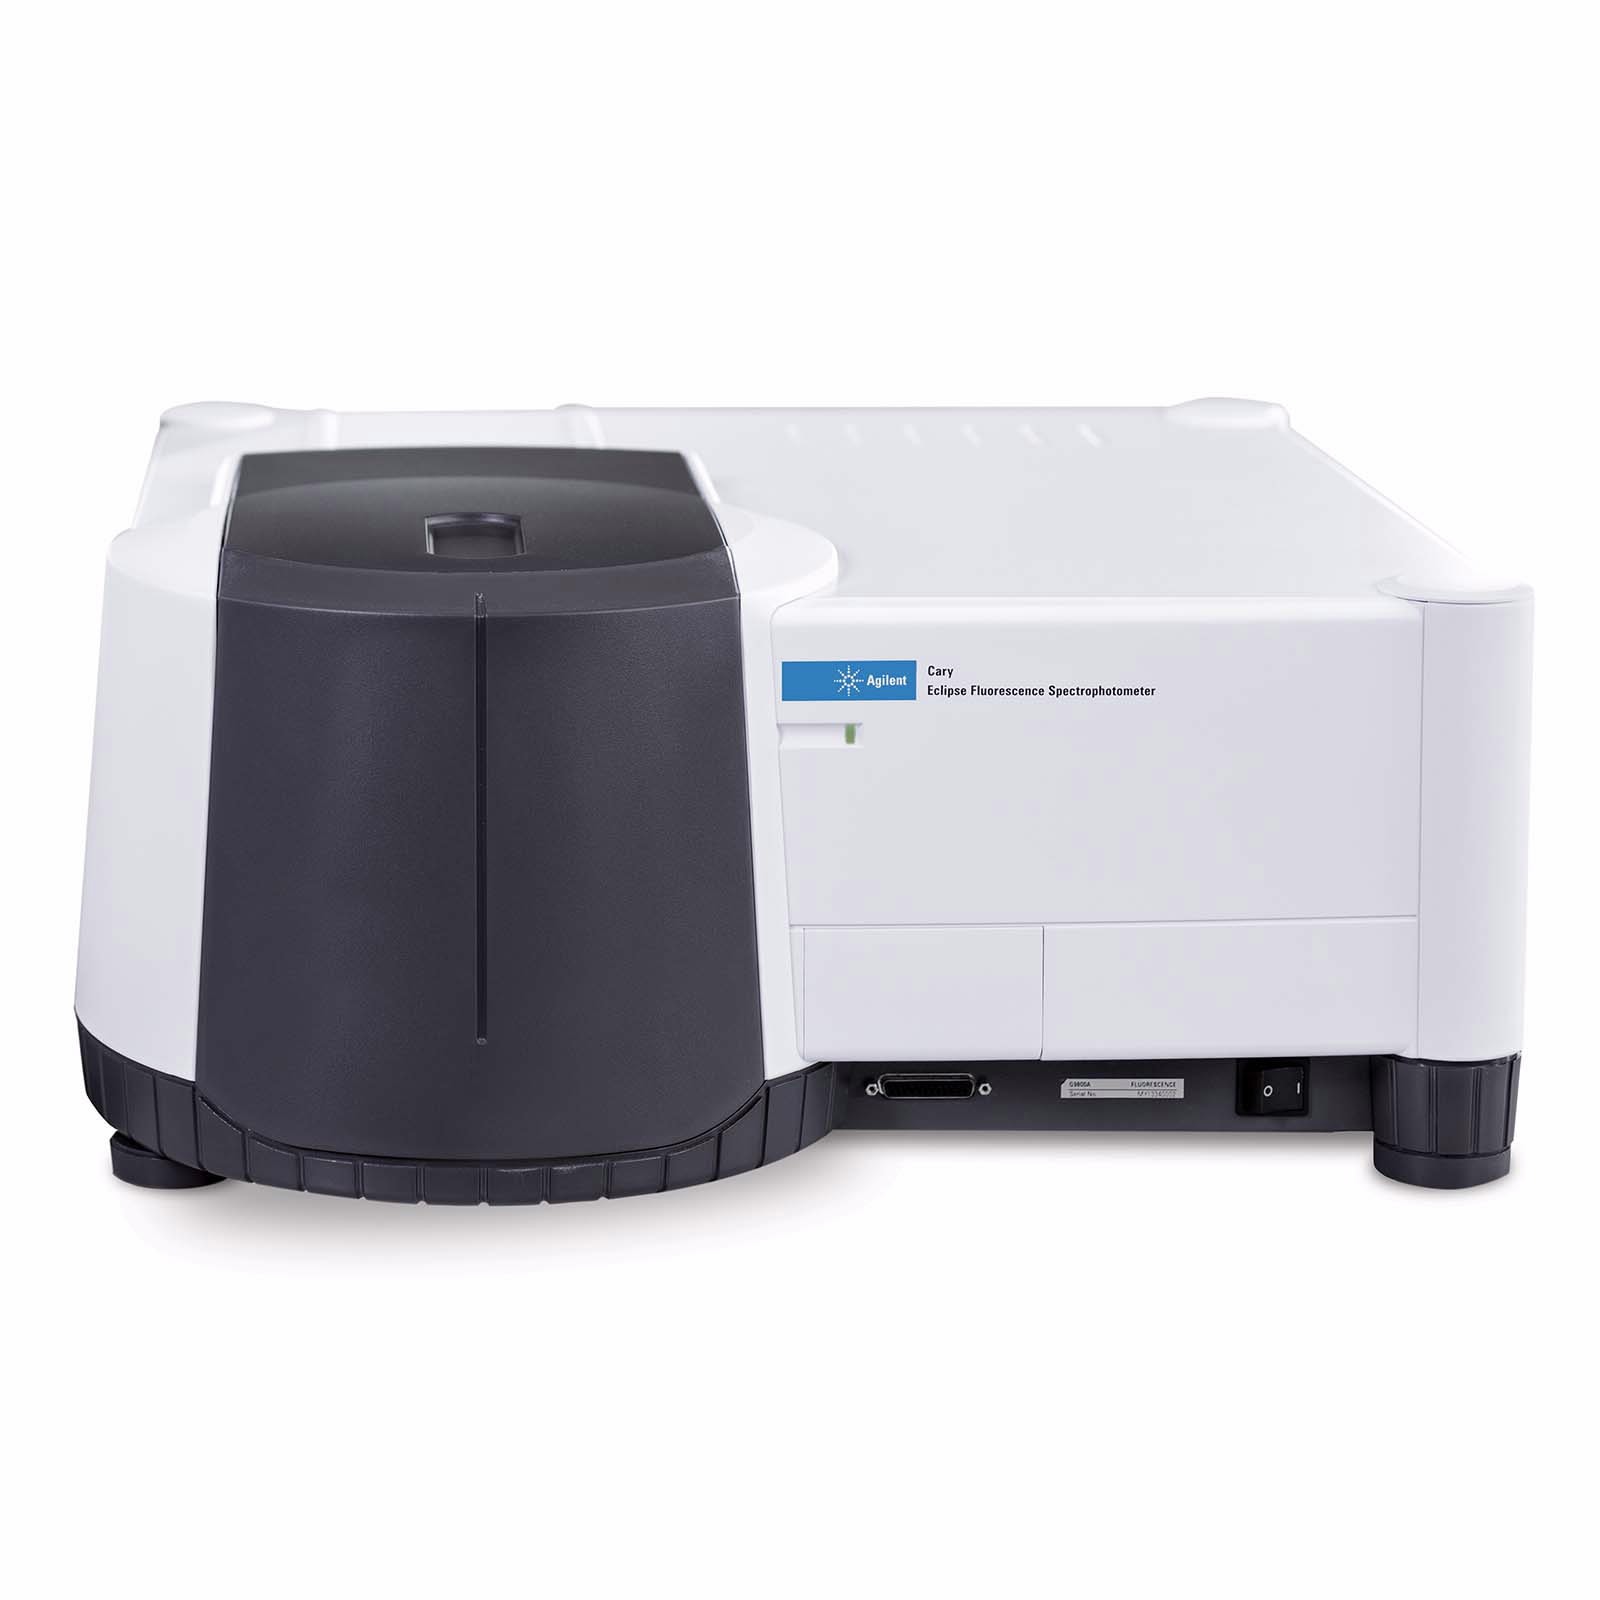 Cary-eclipse-fluorescence-spectrophotometer-agilent_zoom